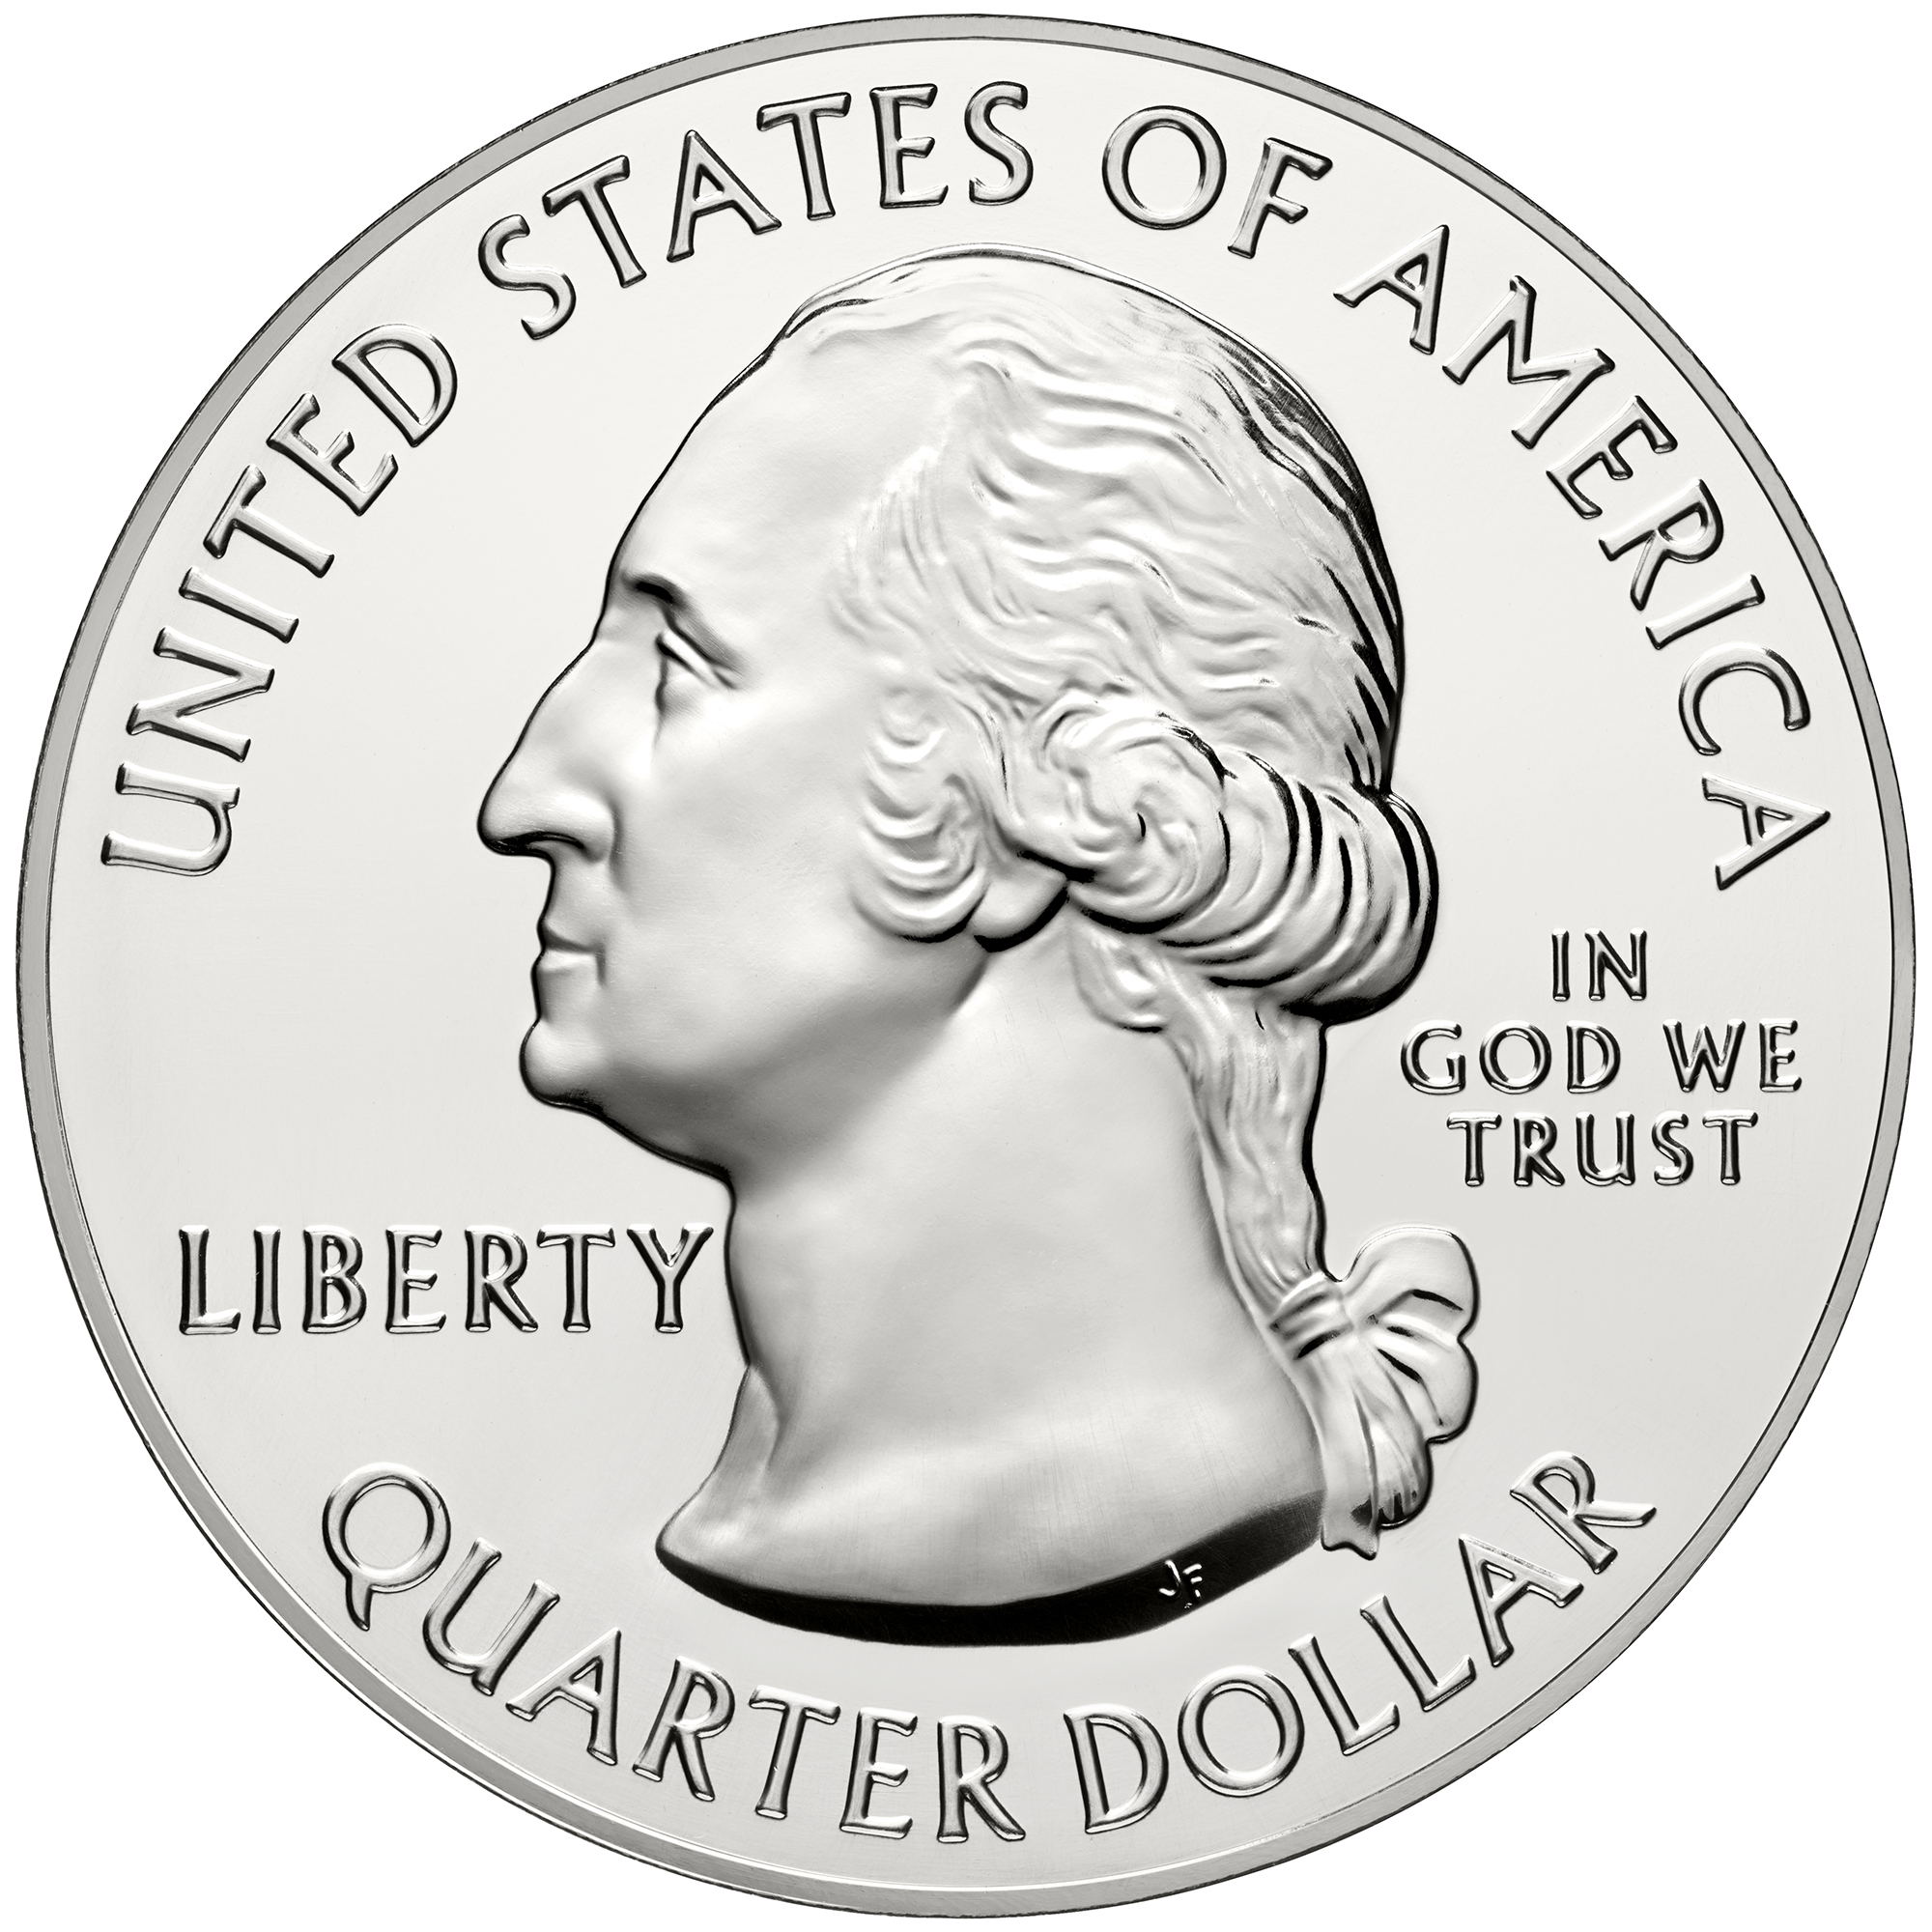 Details about   Hand Cut America the Beautiful Quarter with the Everglades with a Chain & Bale 